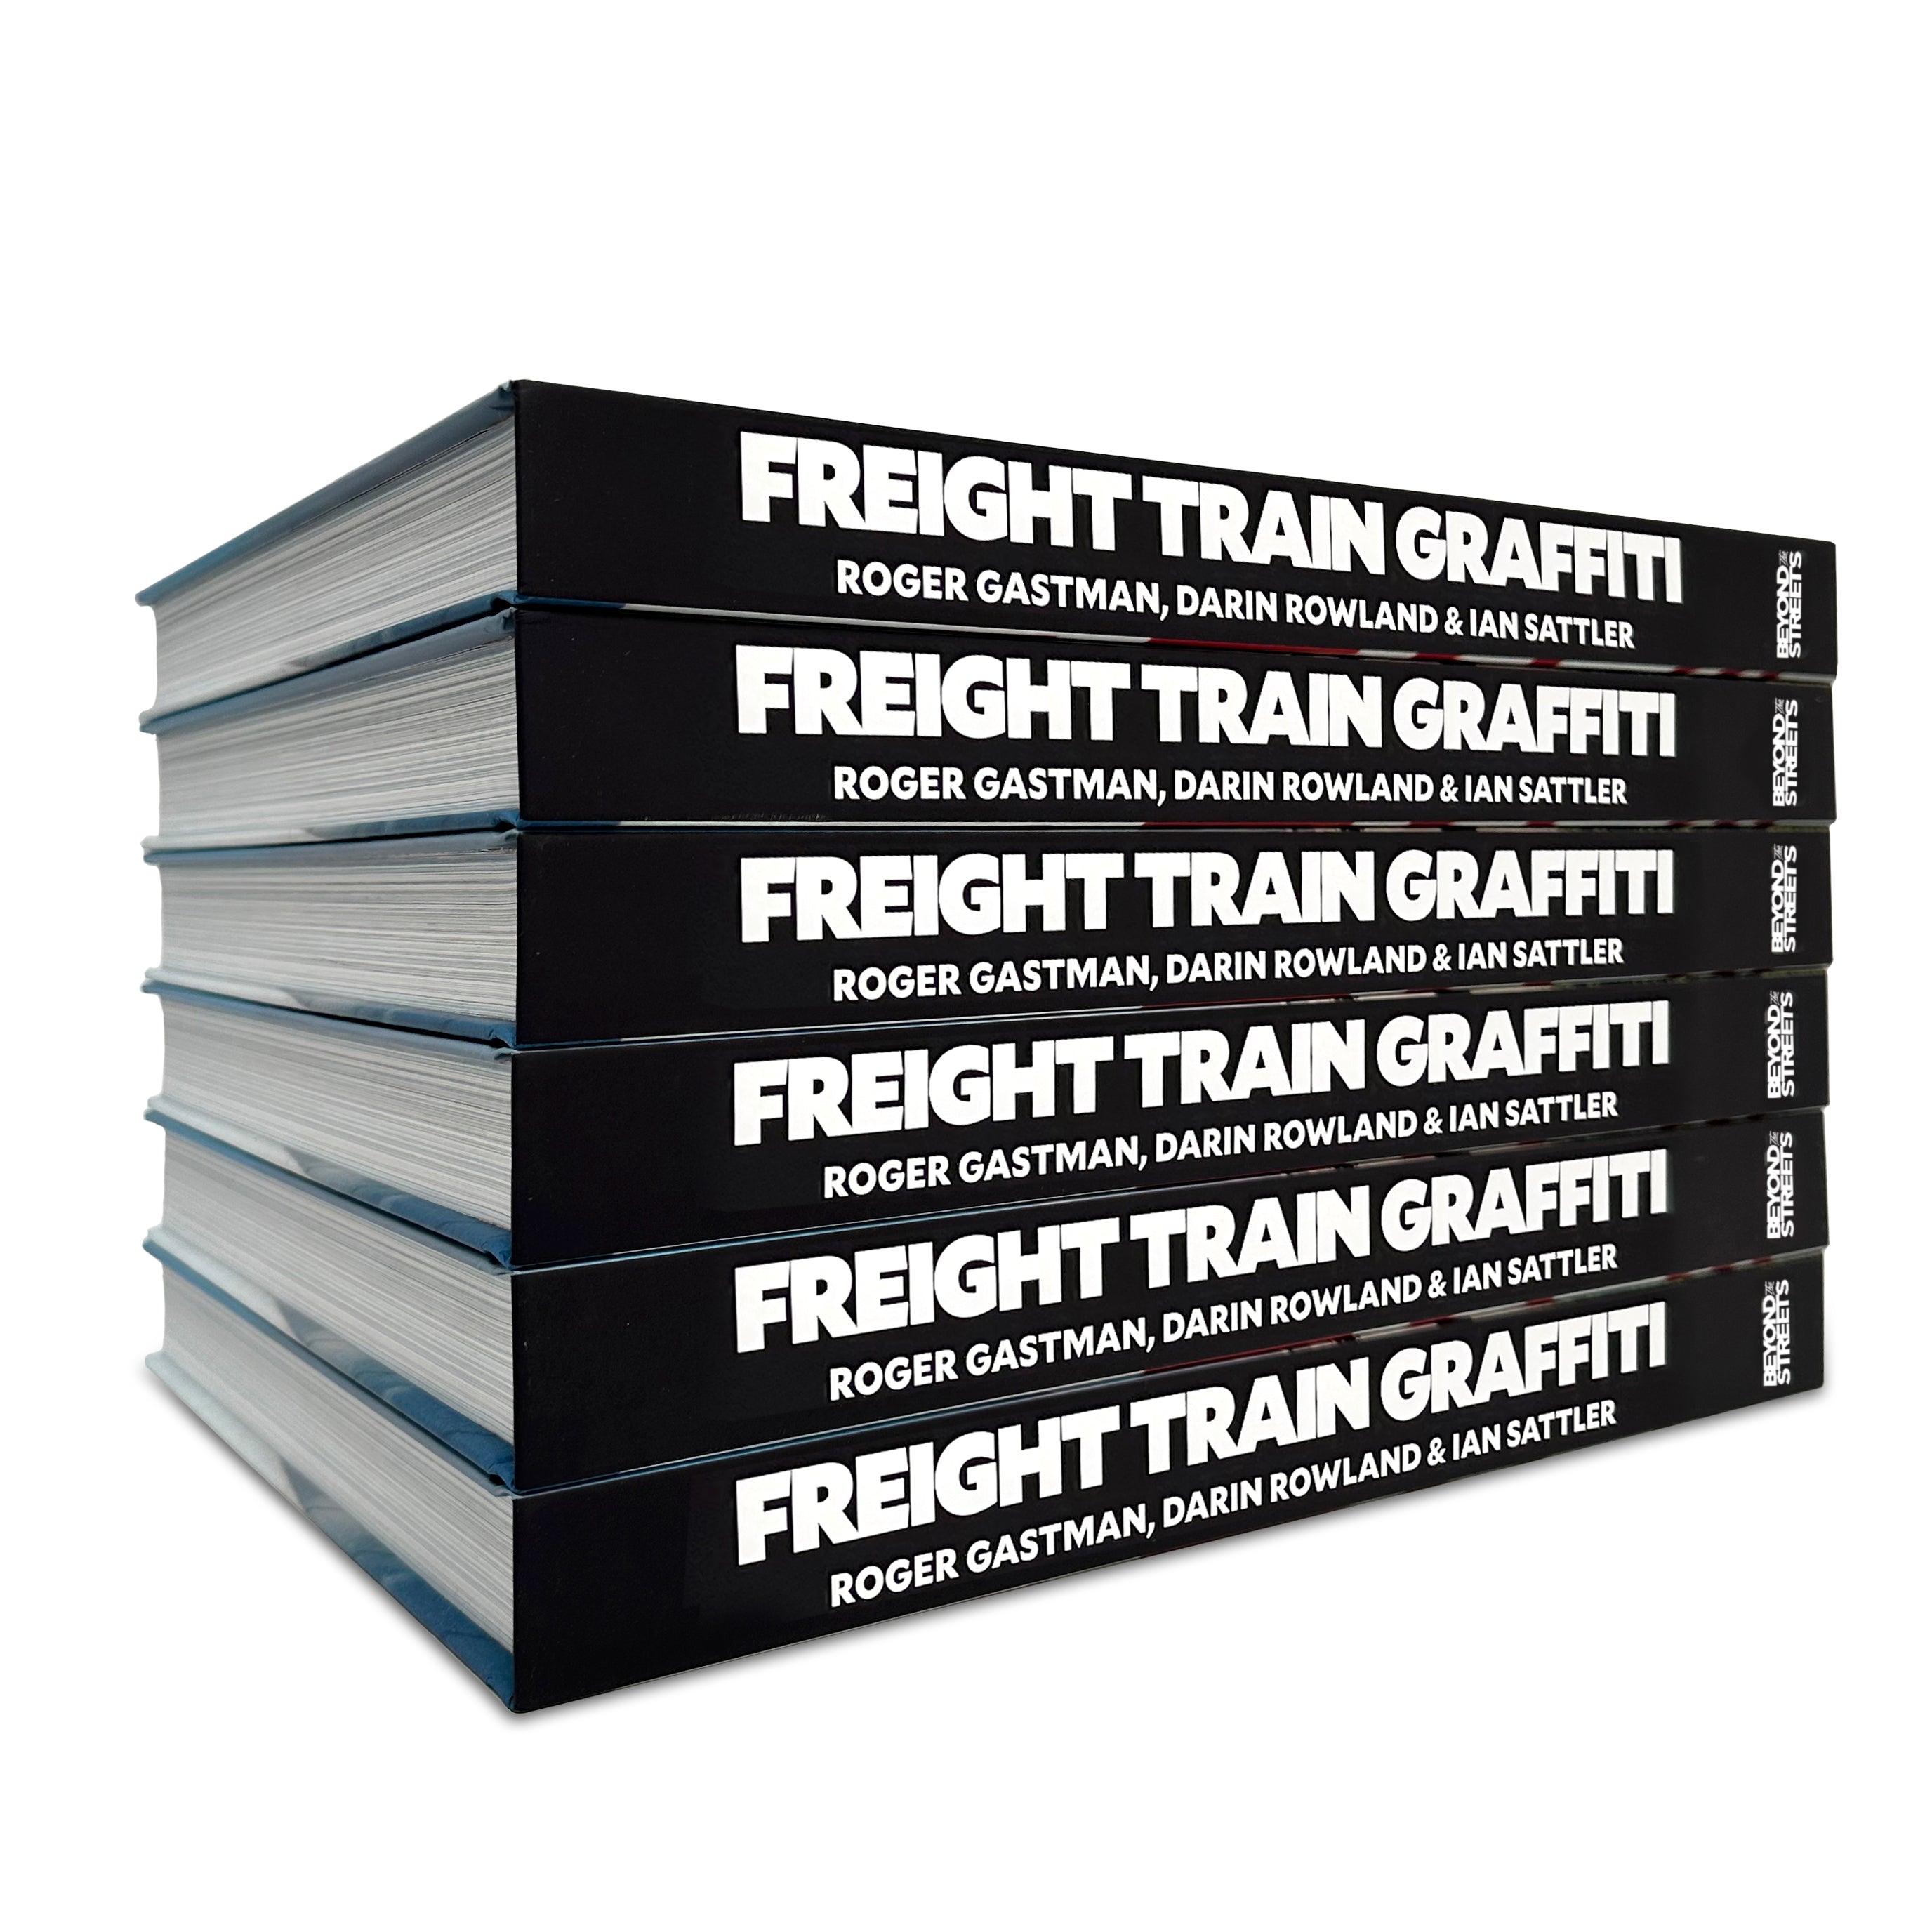 FREIGHT TRAIN GRAFFITI: Expanded 2nd Edition